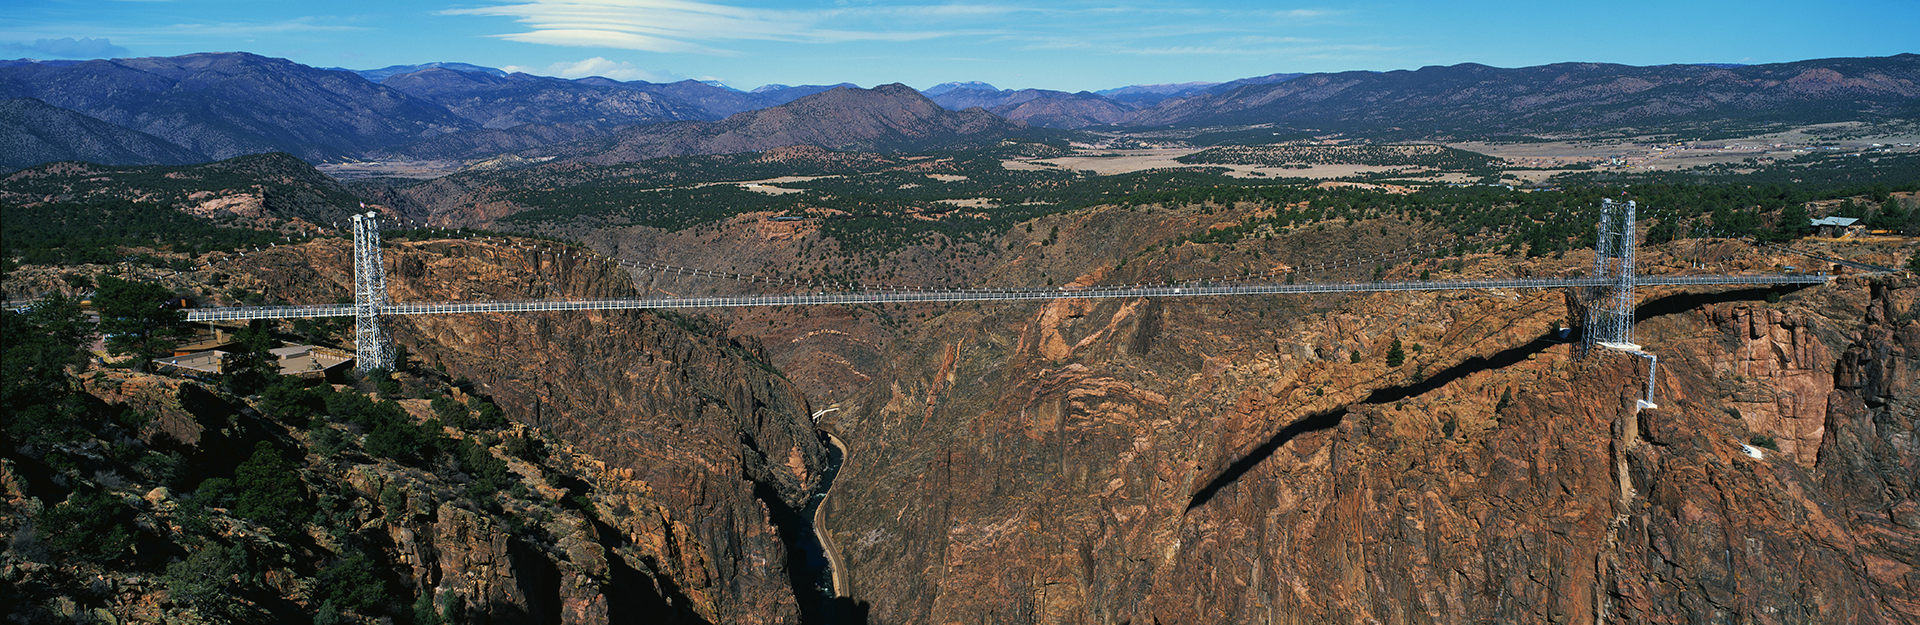 This is the Royal Gorge Bridge which is the world's highest suspension bridge. It is 1053 Ft. above the Arkansas River. Mountains are in the background with red rock below the bridge.